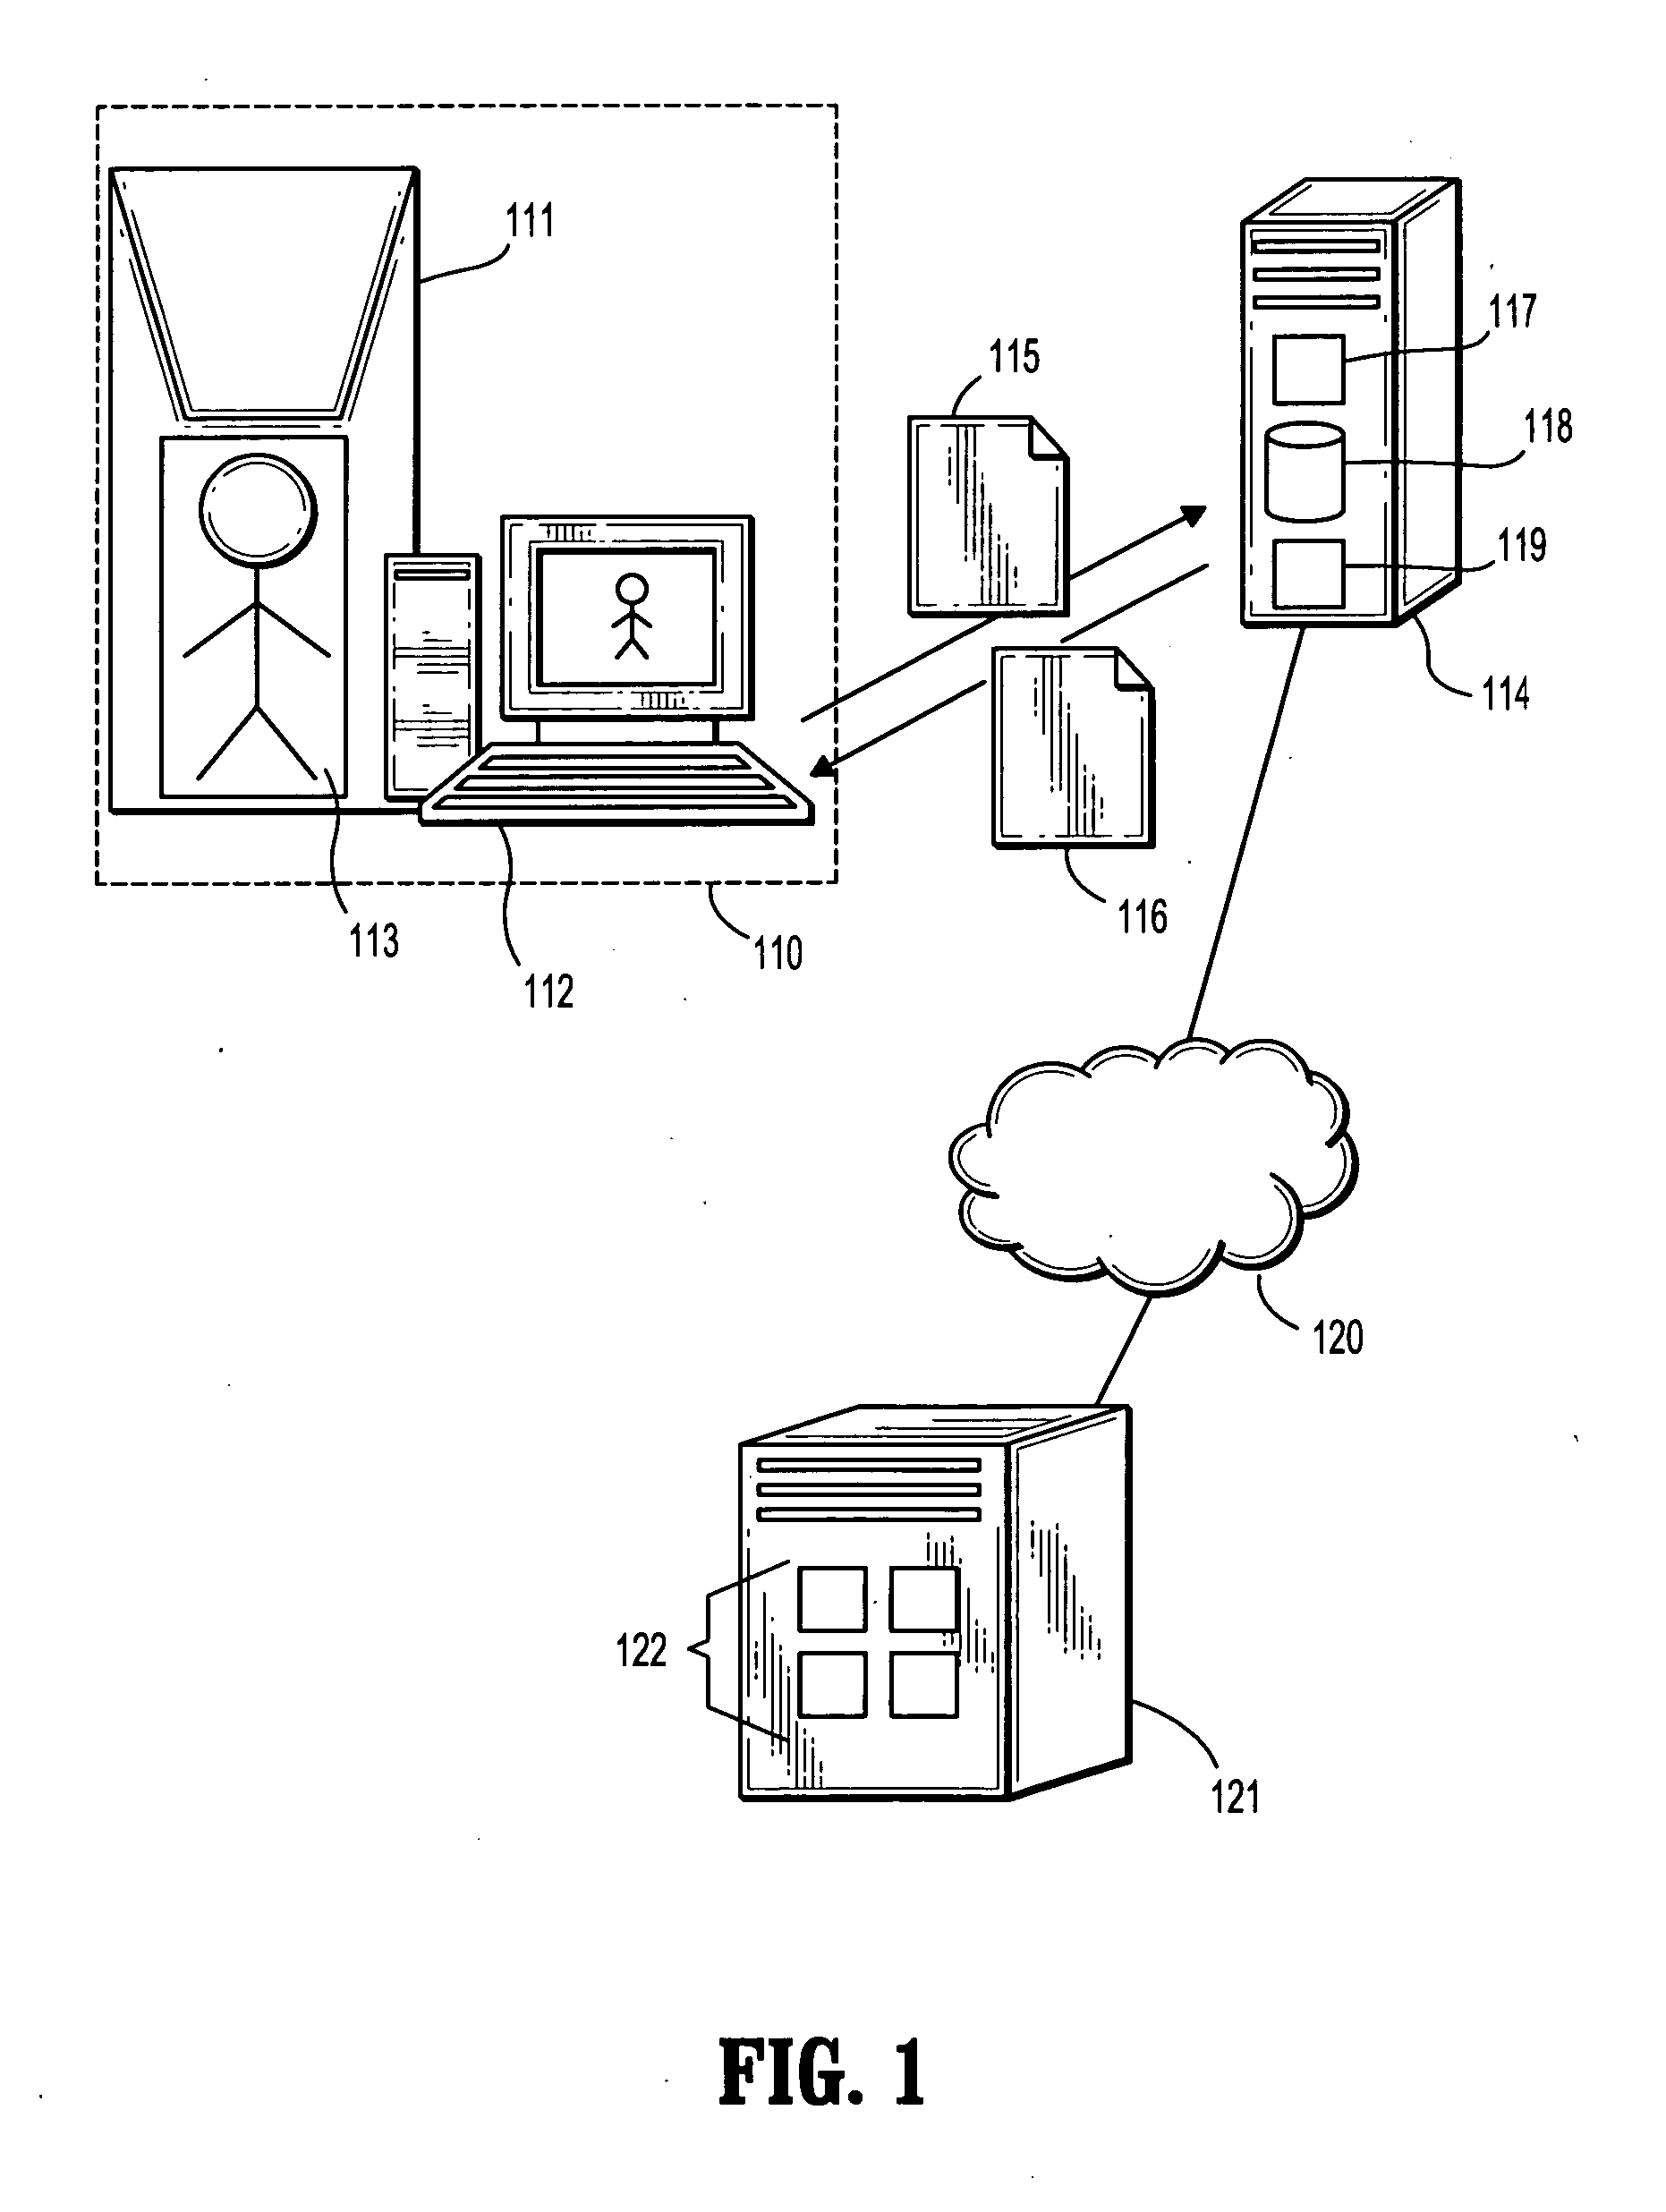 System and method for per-patient licensing of interventional imaging software